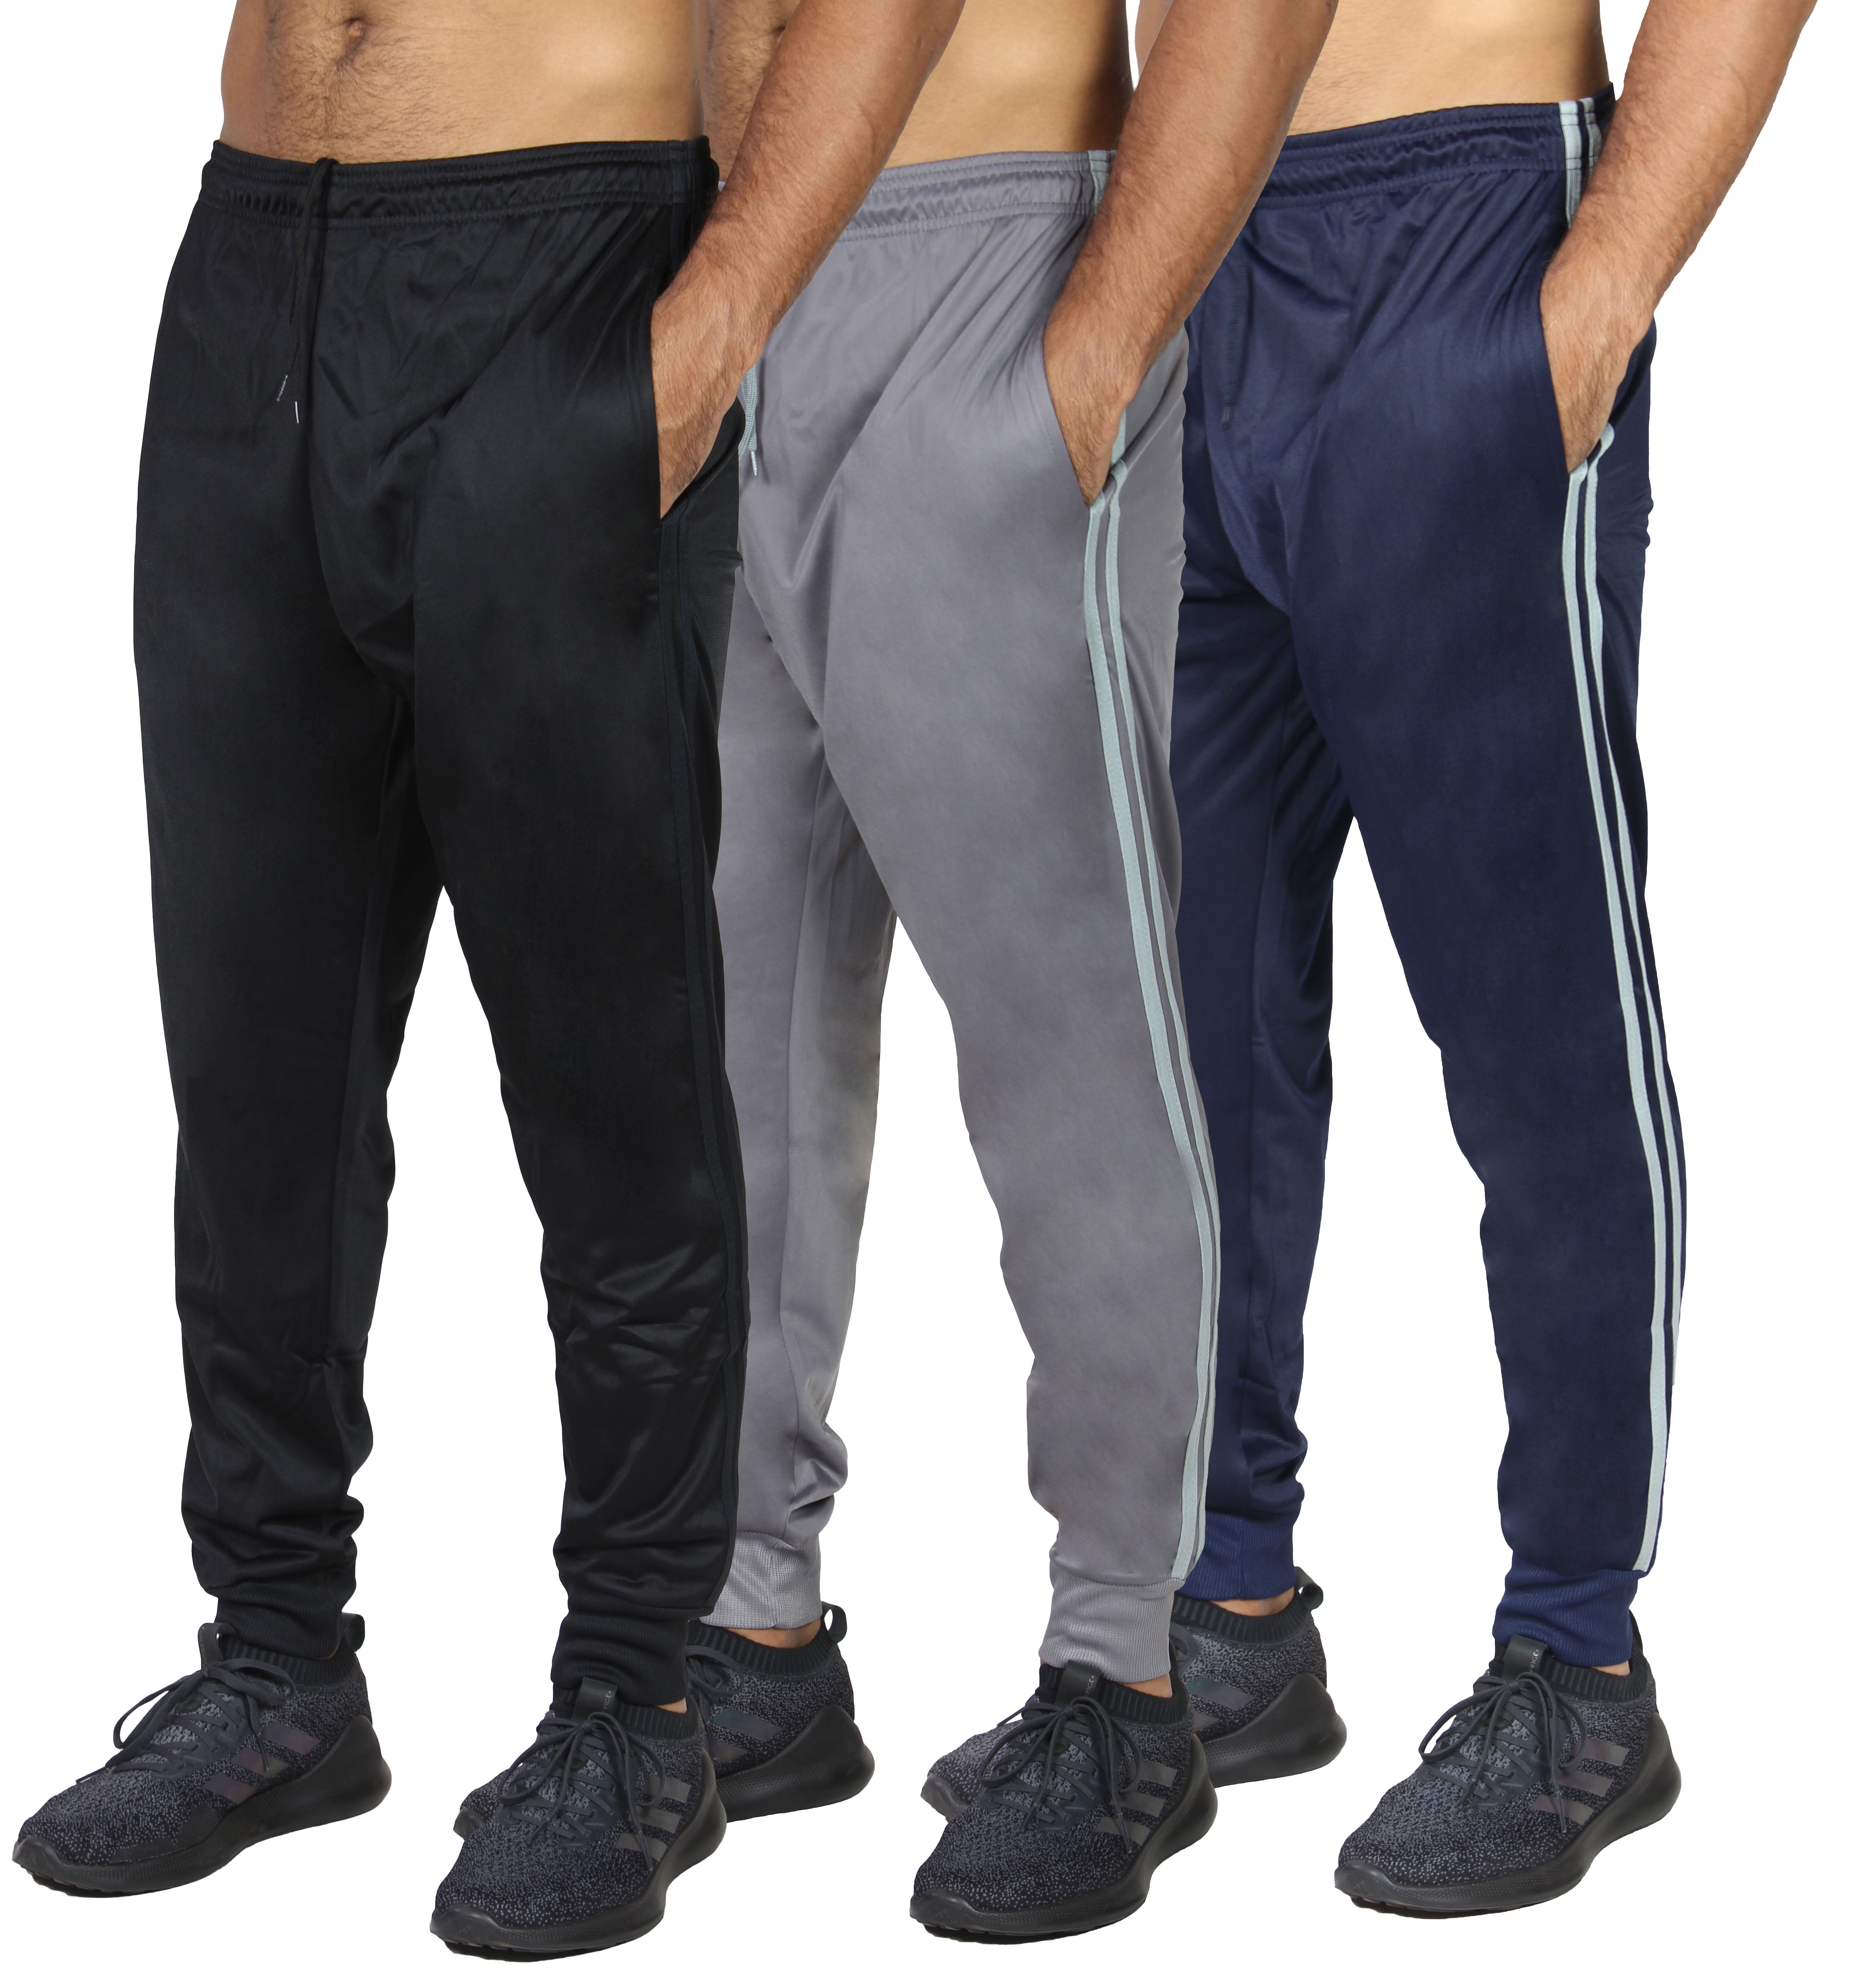 DARESAY Mens Active Pants with Pockets Athletic Workout Joggers Multi ...